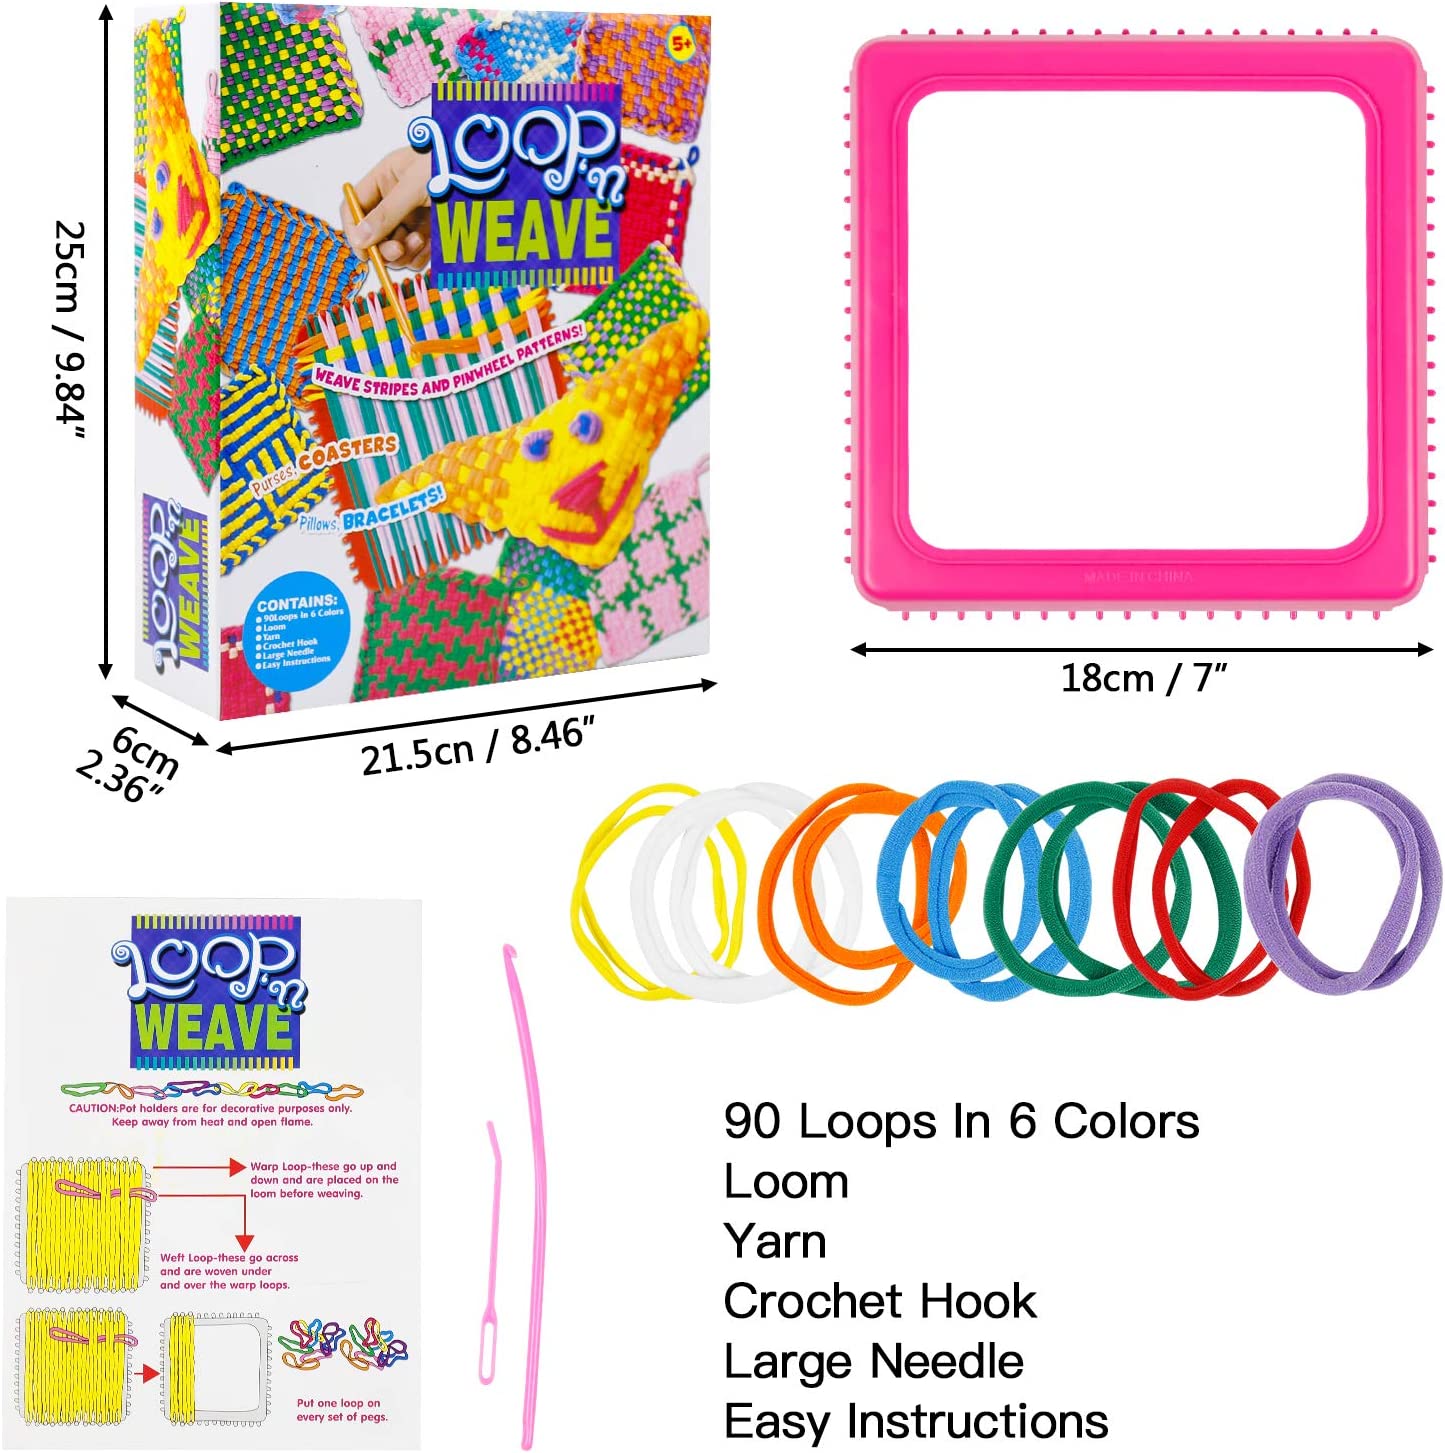 Rirool Weaving Loom Kit Toys for Kids and Adults, Potholder Loops